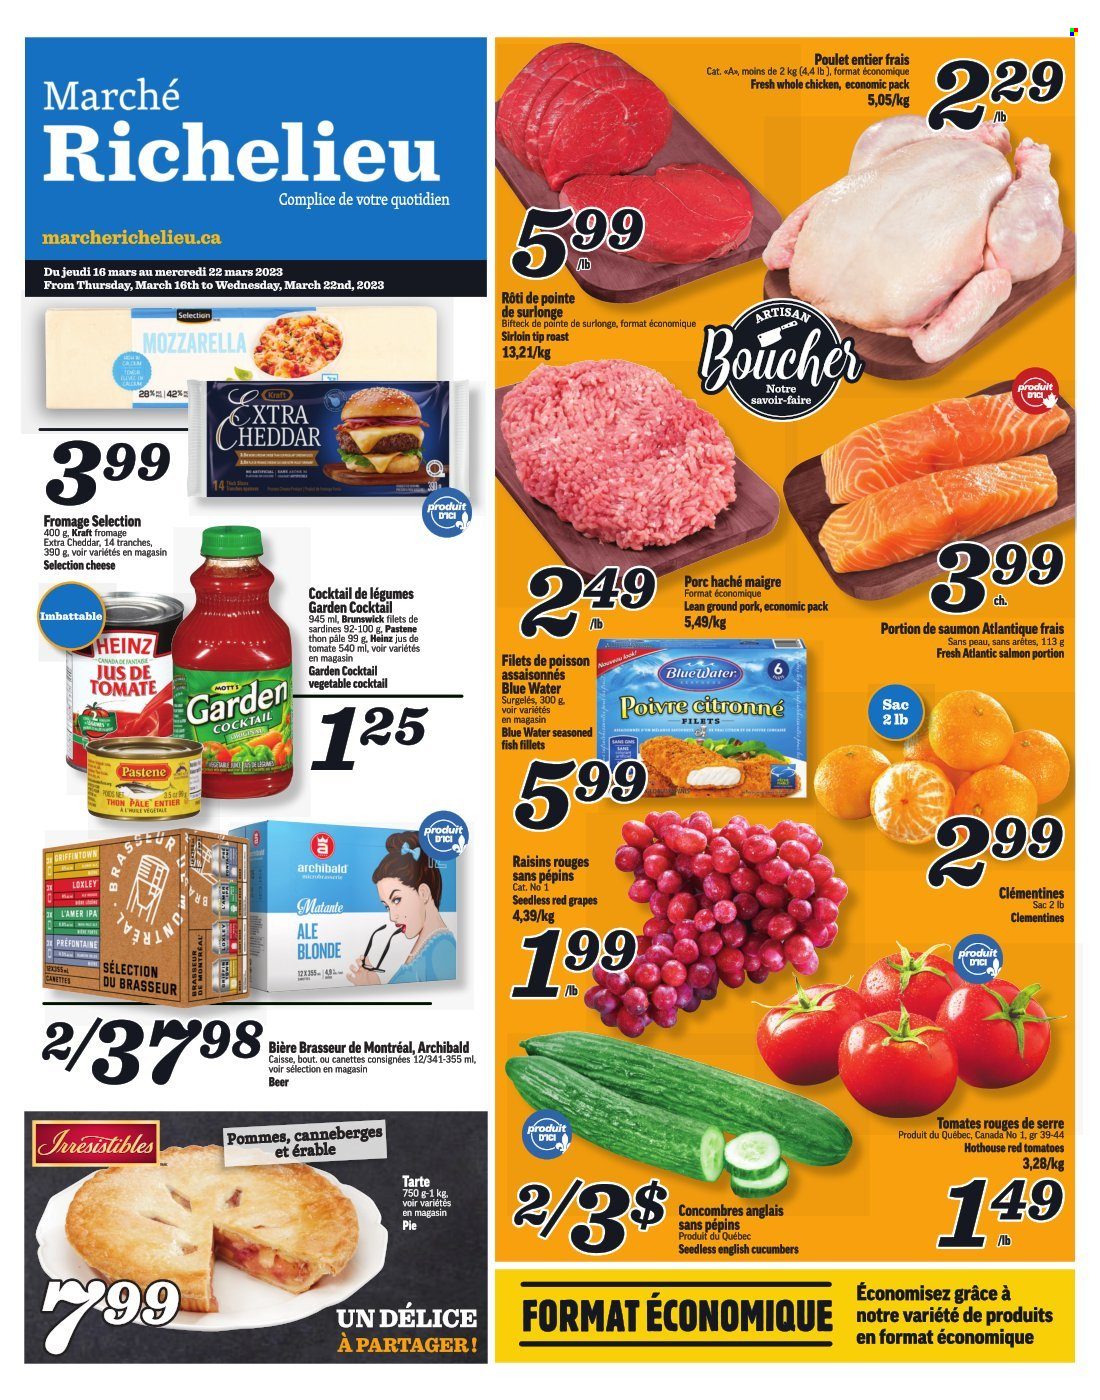 thumbnail - Marché Richelieu Flyer - March 16, 2023 - March 22, 2023 - Sales products - pie, cucumber, tomatoes, clementines, grapes, fish fillets, salmon, sardines, fish, Kraft®, roast, cheddar, cheese, Mars, dried fruit, water, Richelieu, IPA, whole chicken, chicken, ground pork, mozzarella, raisins, Heinz. Page 1.